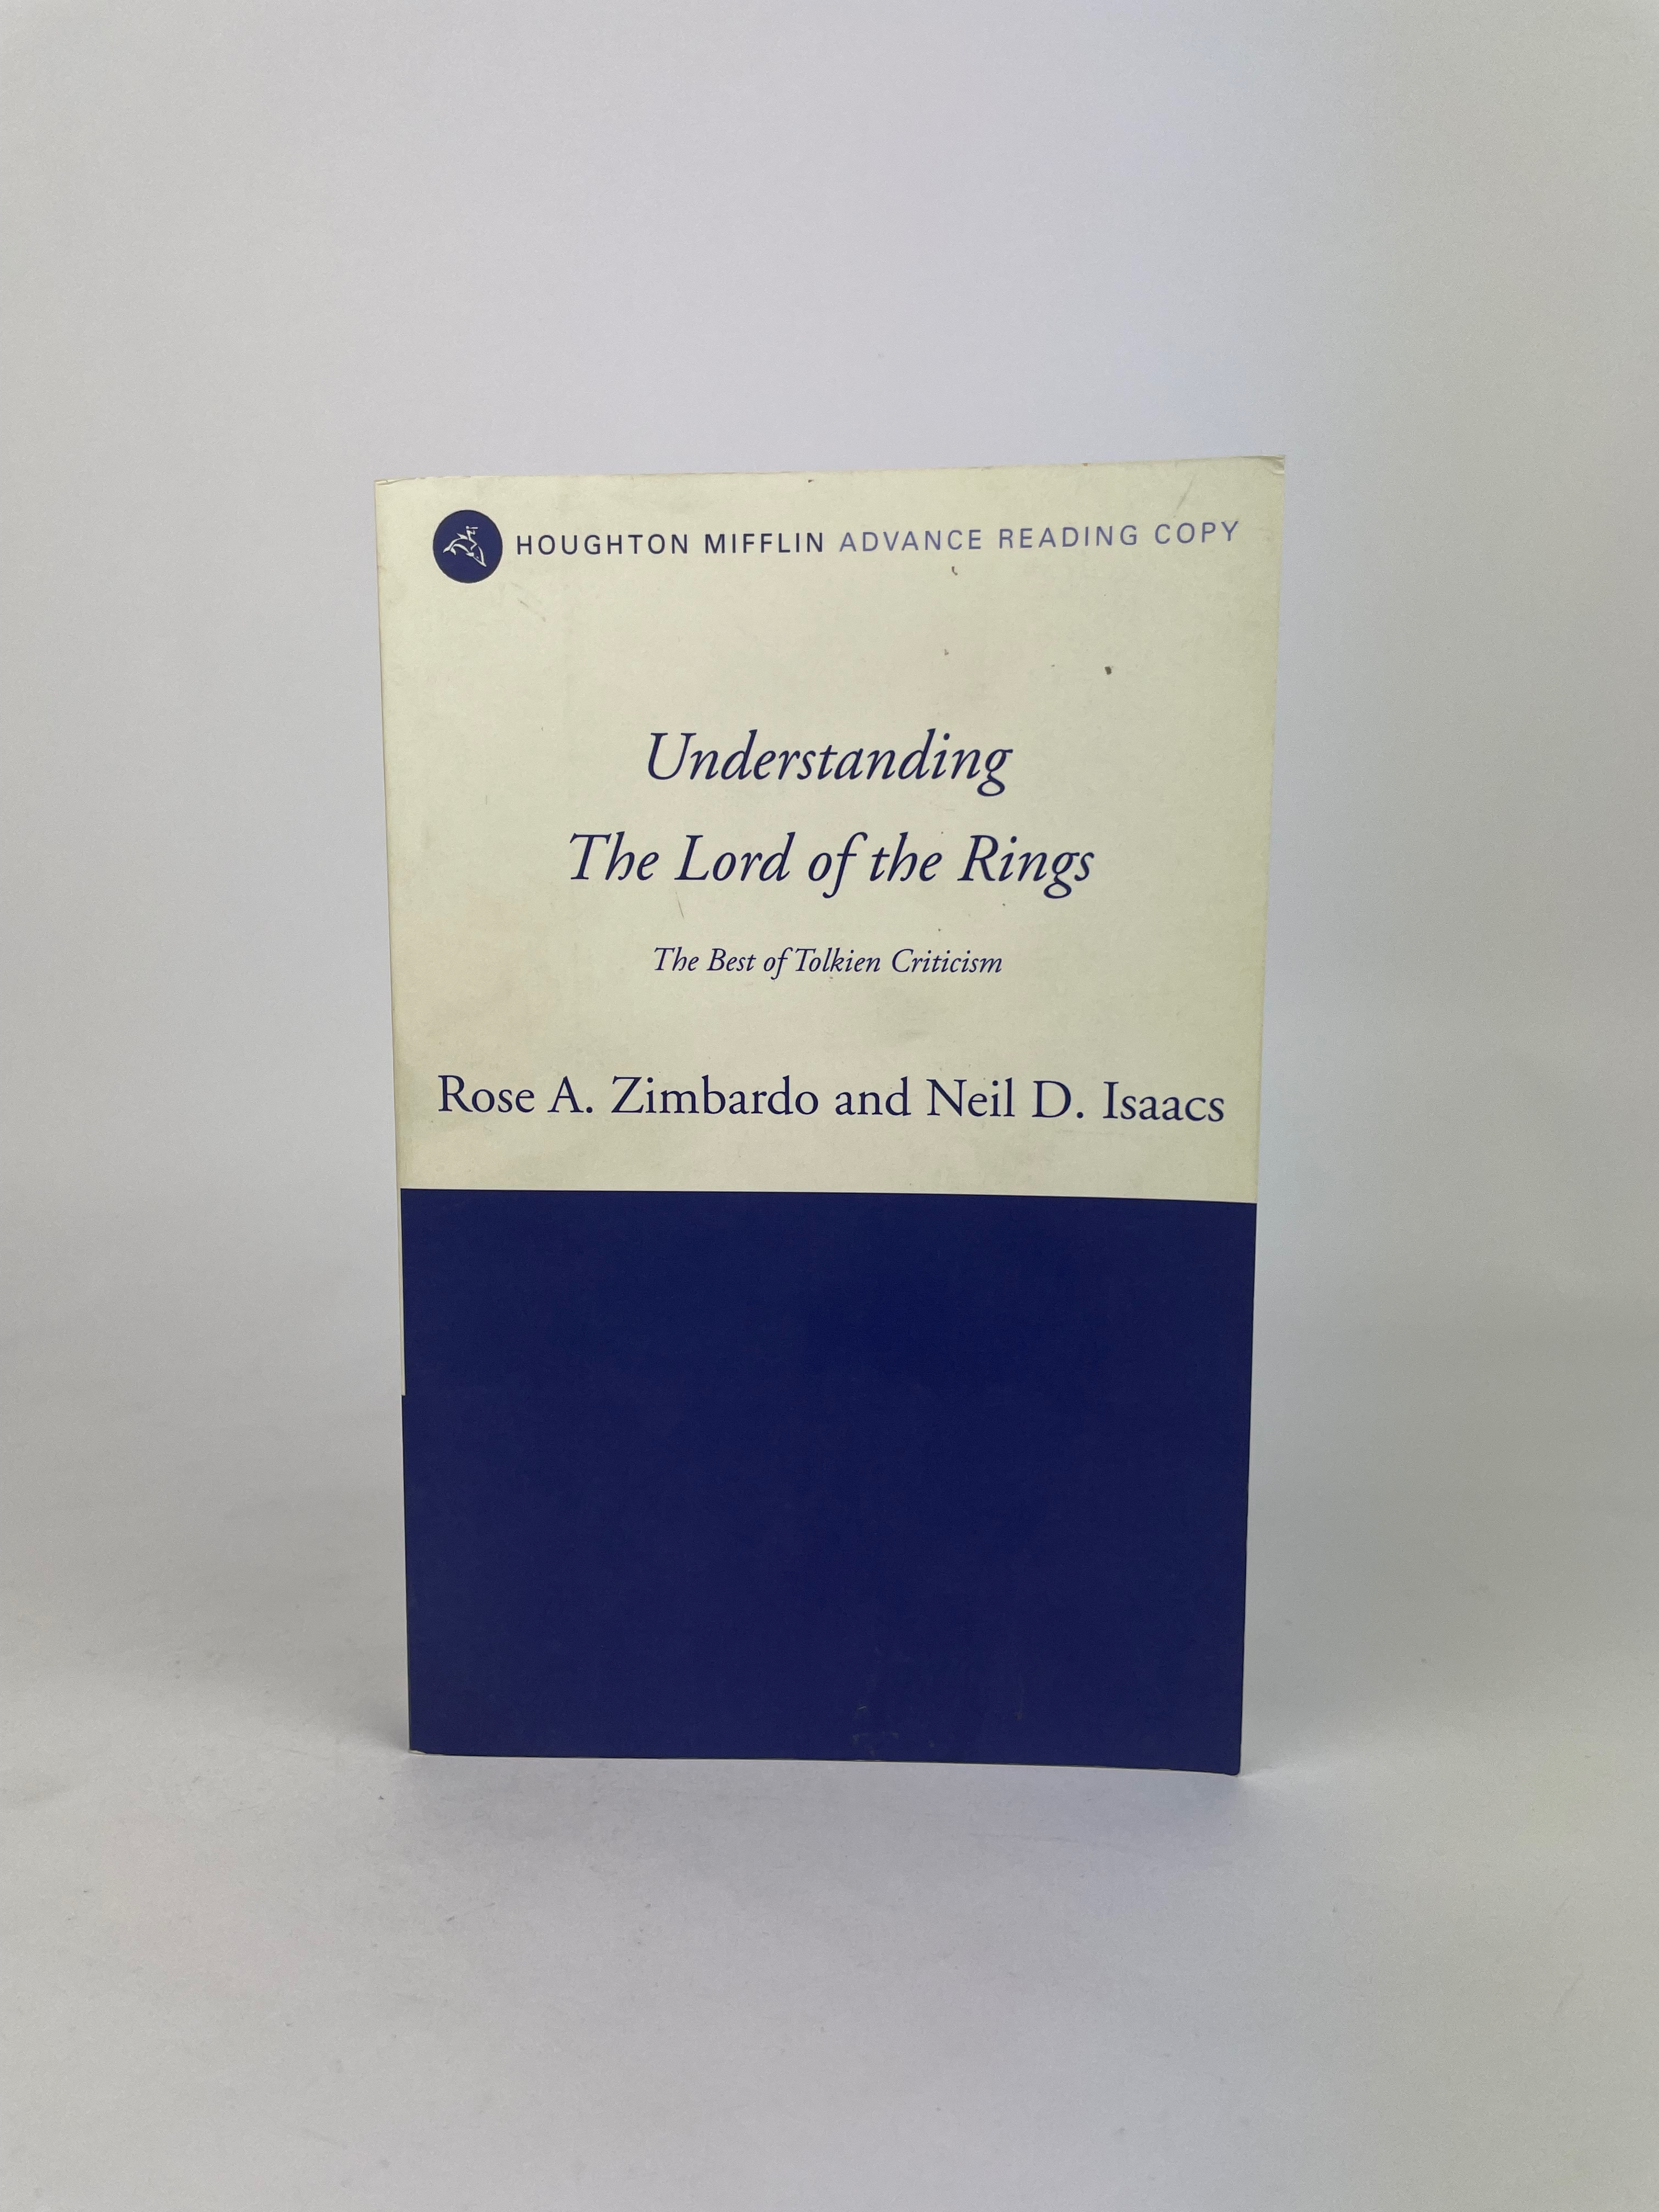 Advance Uncorrected Proof of Understanding The Lord of the Rings by Rose A Zimbardo and Neil D. Isaacs